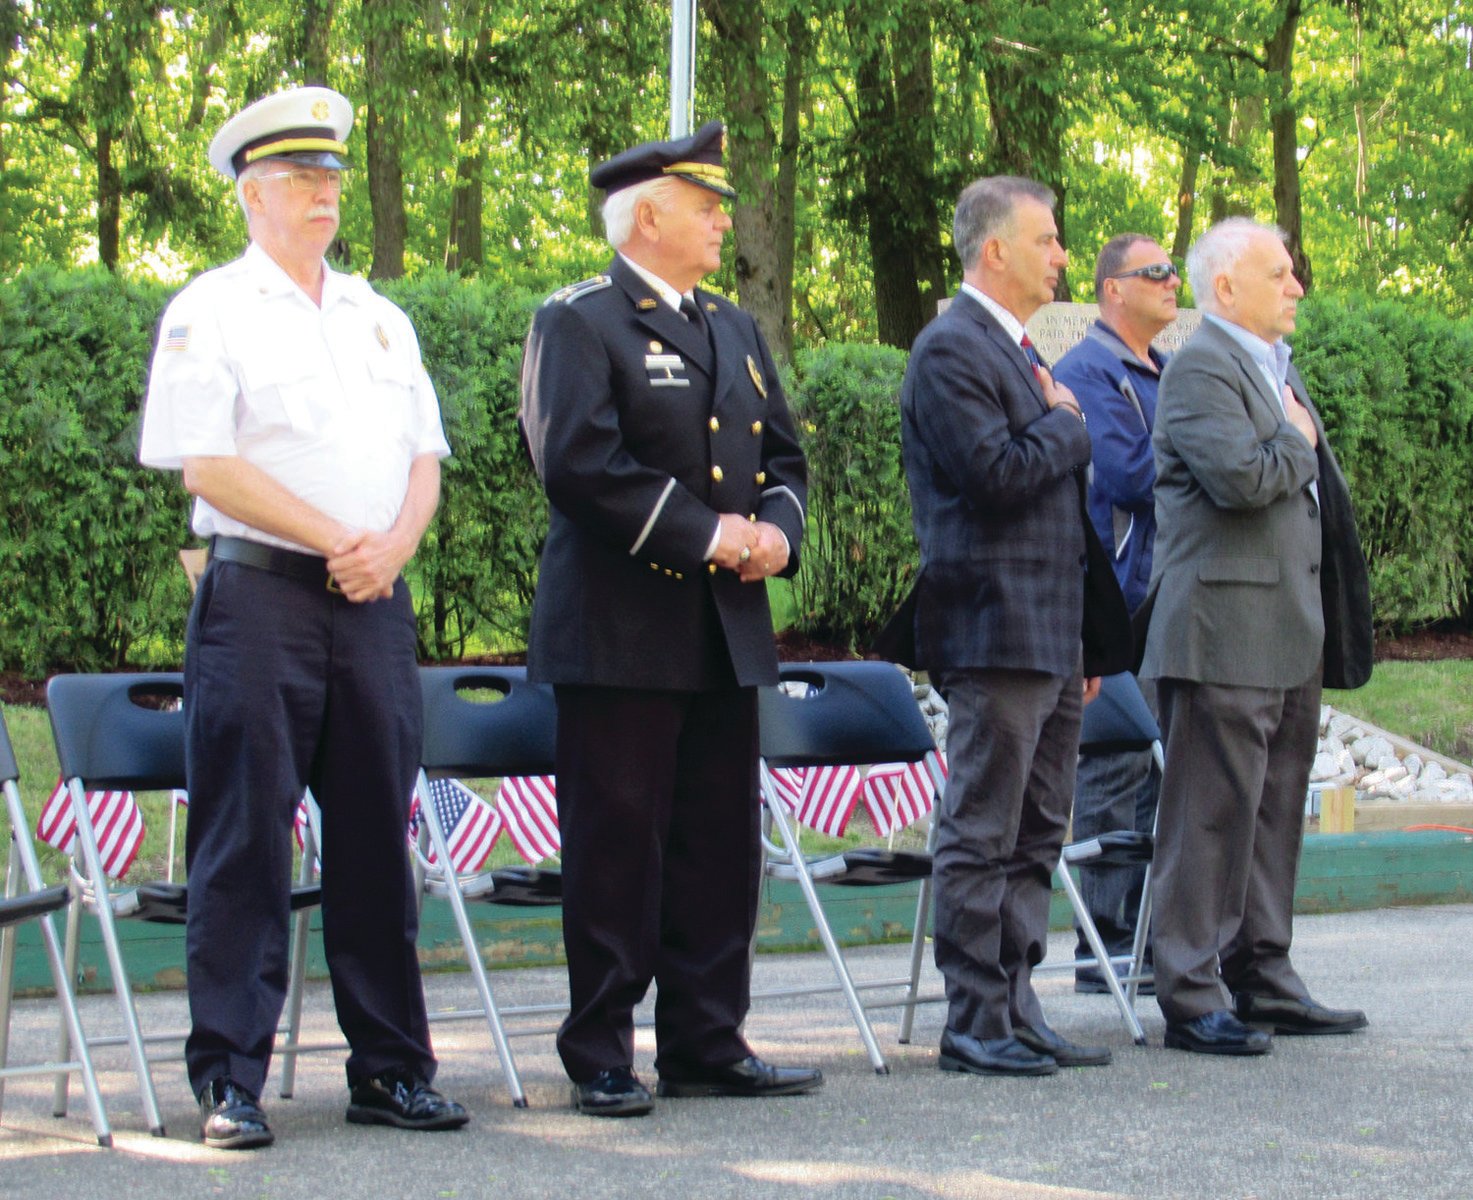 SUPER SALUTE: Johnston officials like Fire Chief Peter Lamb, former Police Chief Richard S. Tamburini, state Sen. Frank Lombardo and late Parks and Recreation Director Dan Mazzulla, helped honor the town’s lost military heroes at a 2019 Memorial Day ceremony. One of those heroes was U.S. Army First Lt. Anthony R. Mazzulla, who had been MIA since 1950.